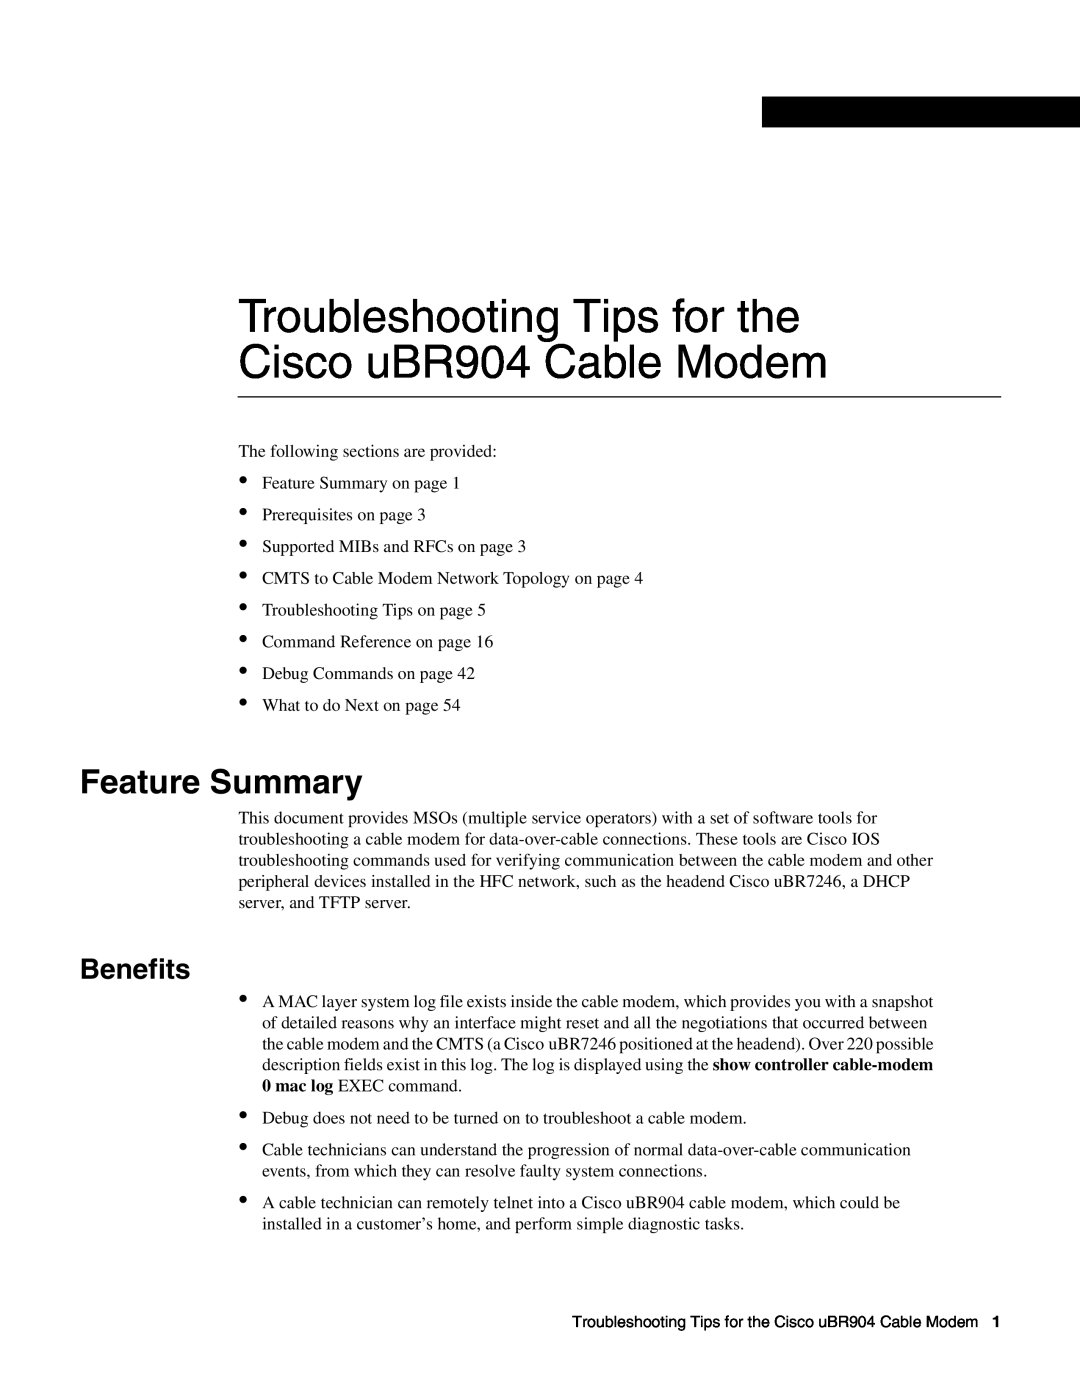 Cisco Systems UBR904 manual Feature Summary, Benefits, Troubleshooting Tips for the Cisco uBR904 Cable Modem 